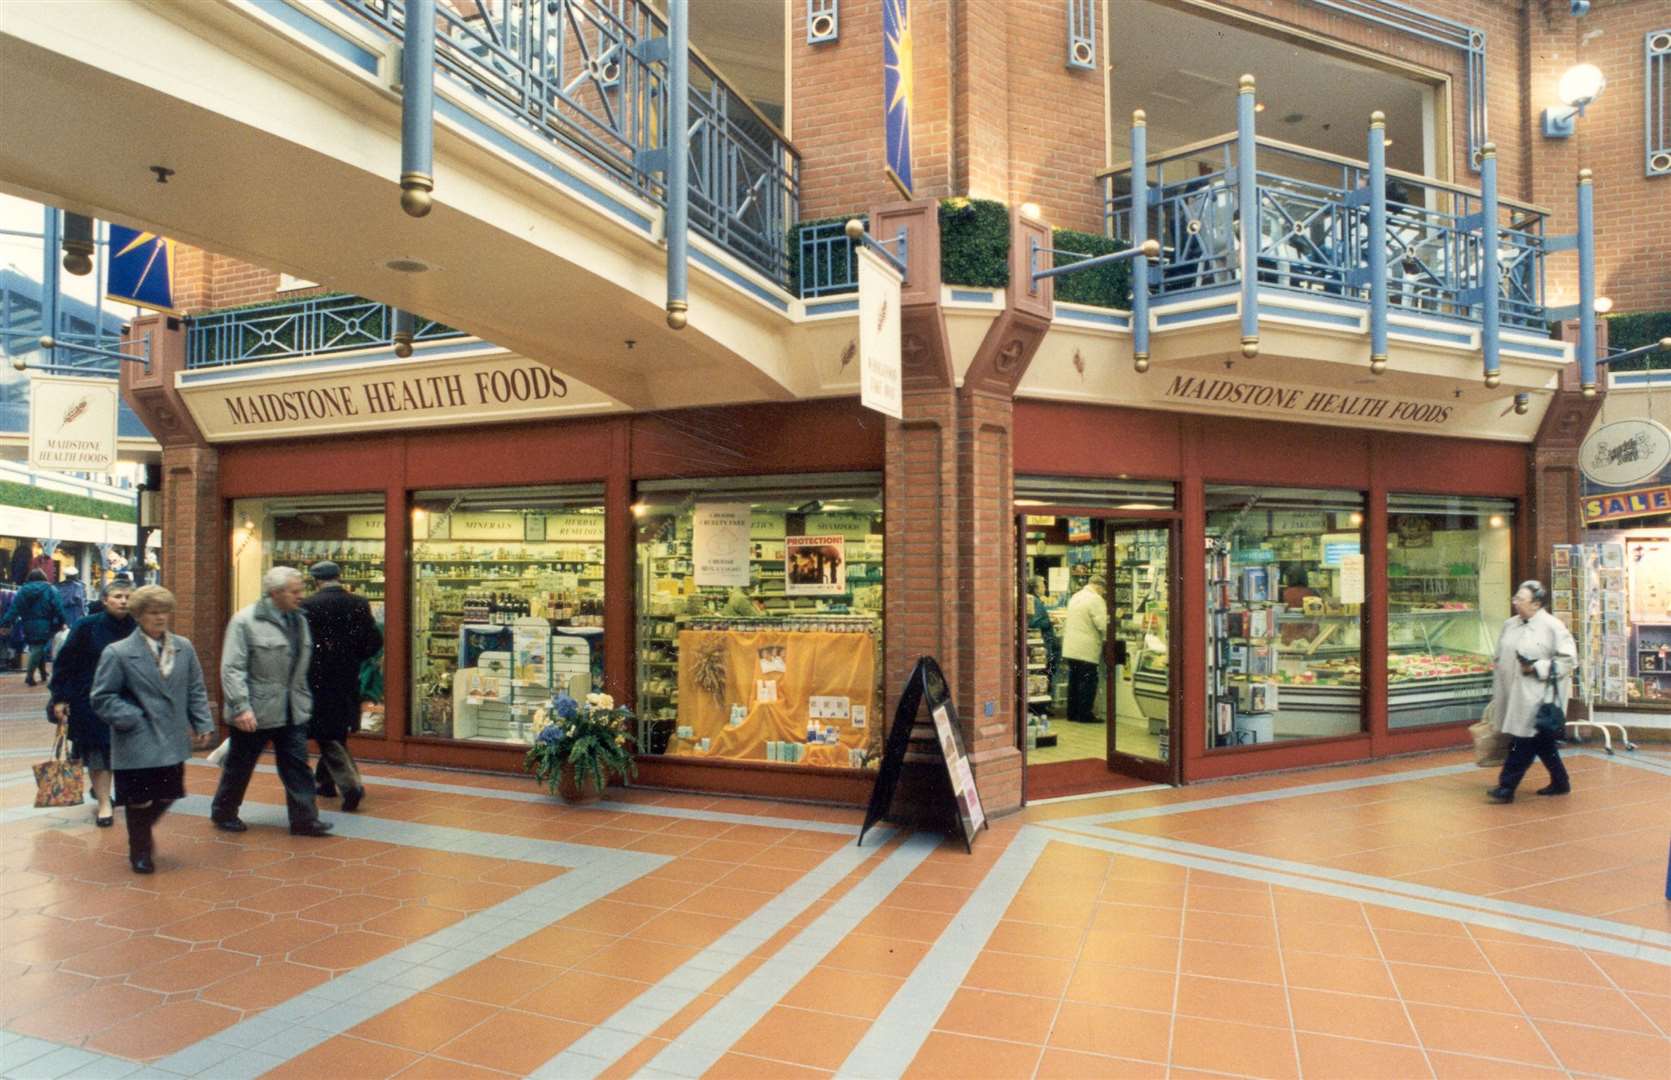 Maidstone Health Foods, pictured in 1995